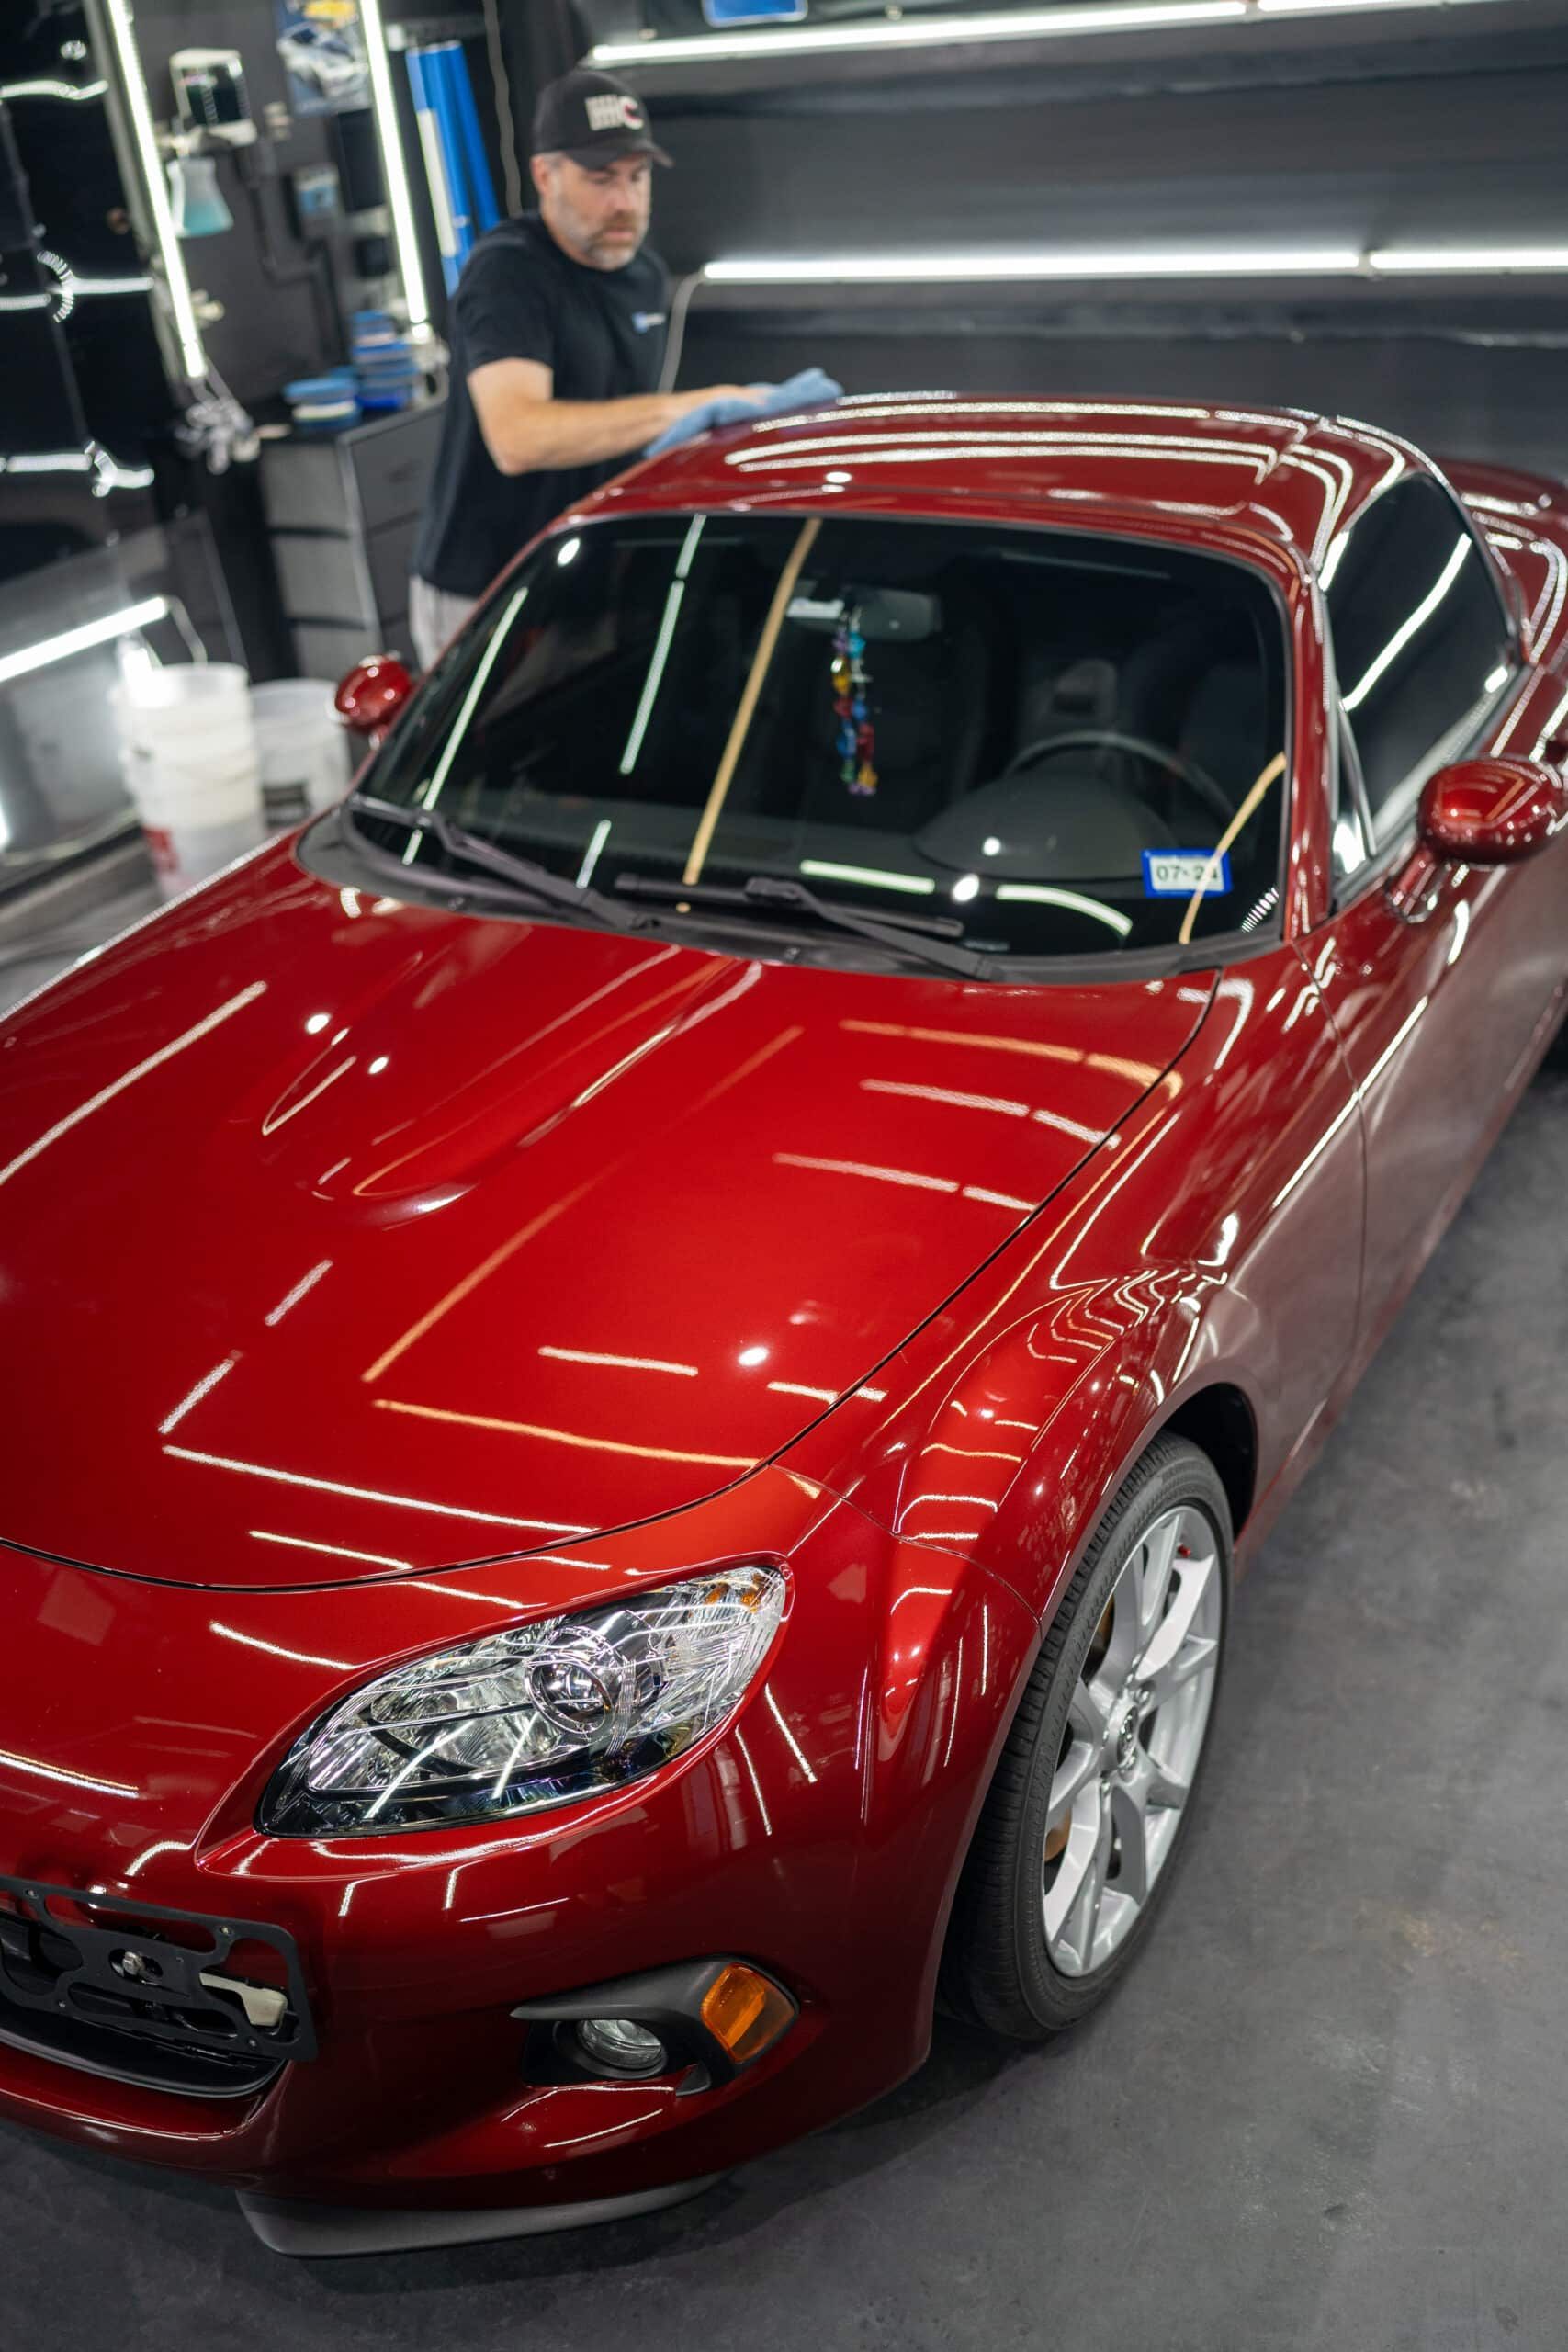 A man is standing next to a red sports car in a garage.